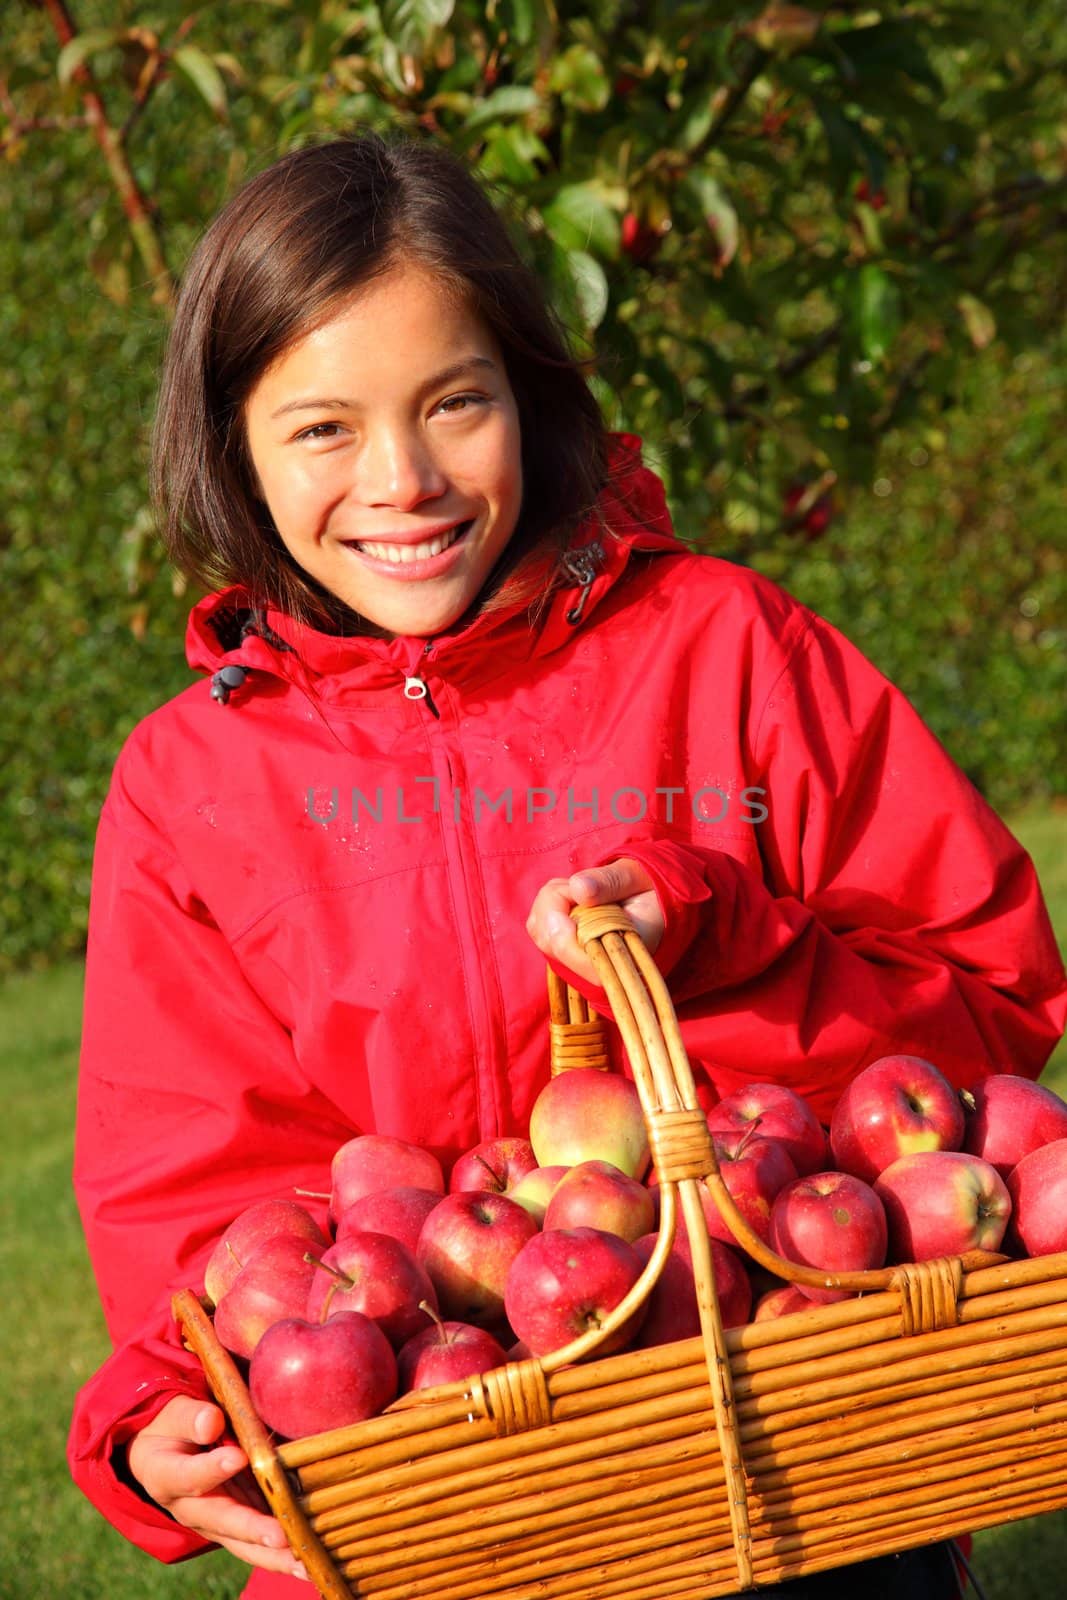 Apple picking in the fall - beautiful girl with basket full of red apples.